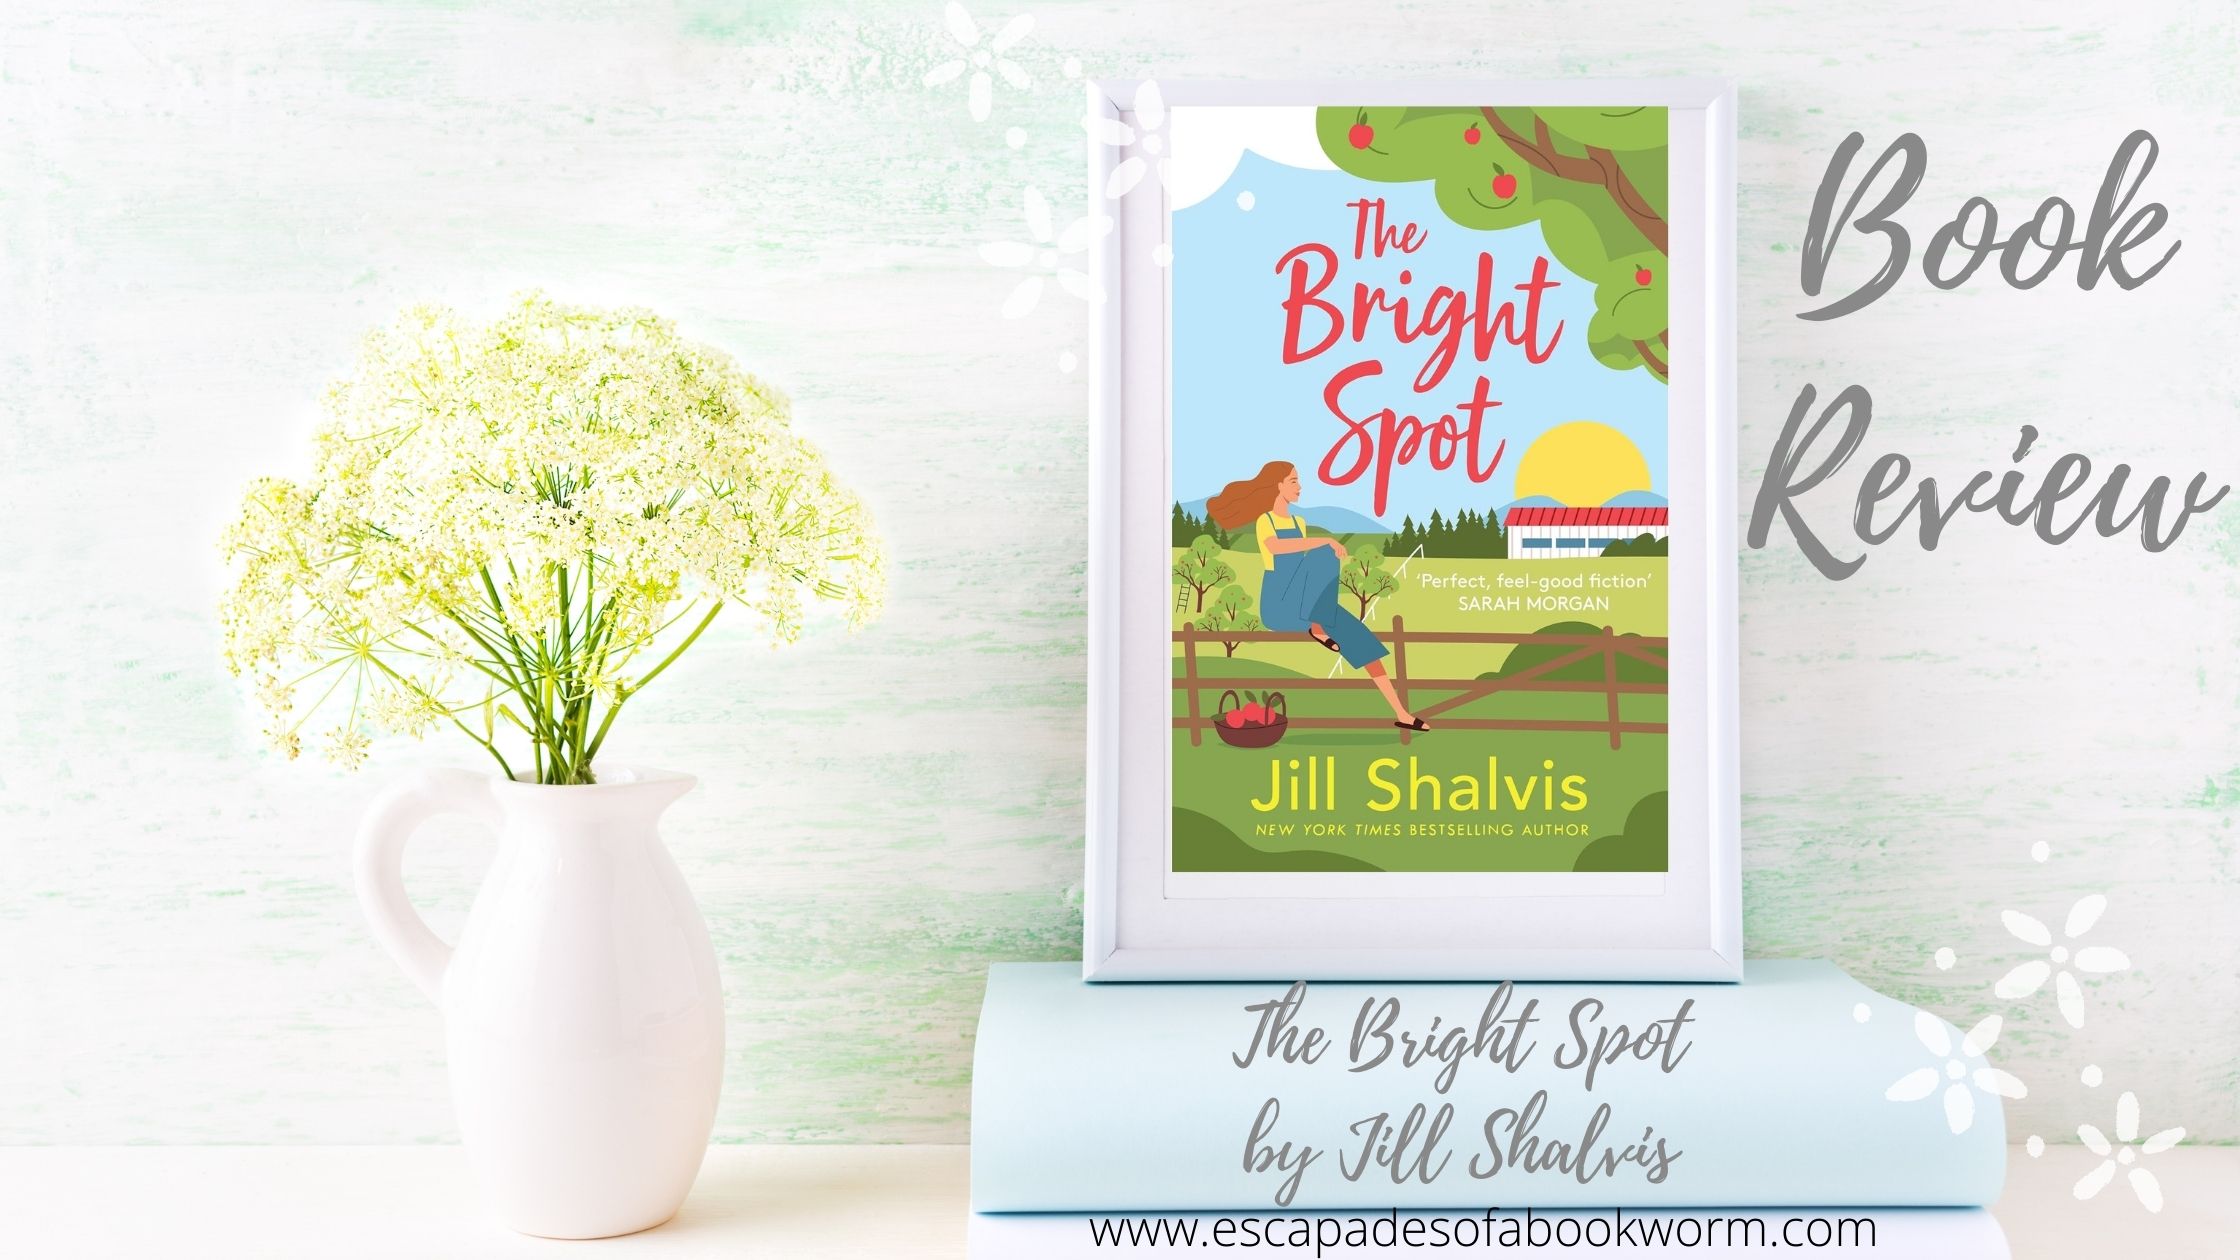 Book Review The Bright Spot by Jill Shalvis